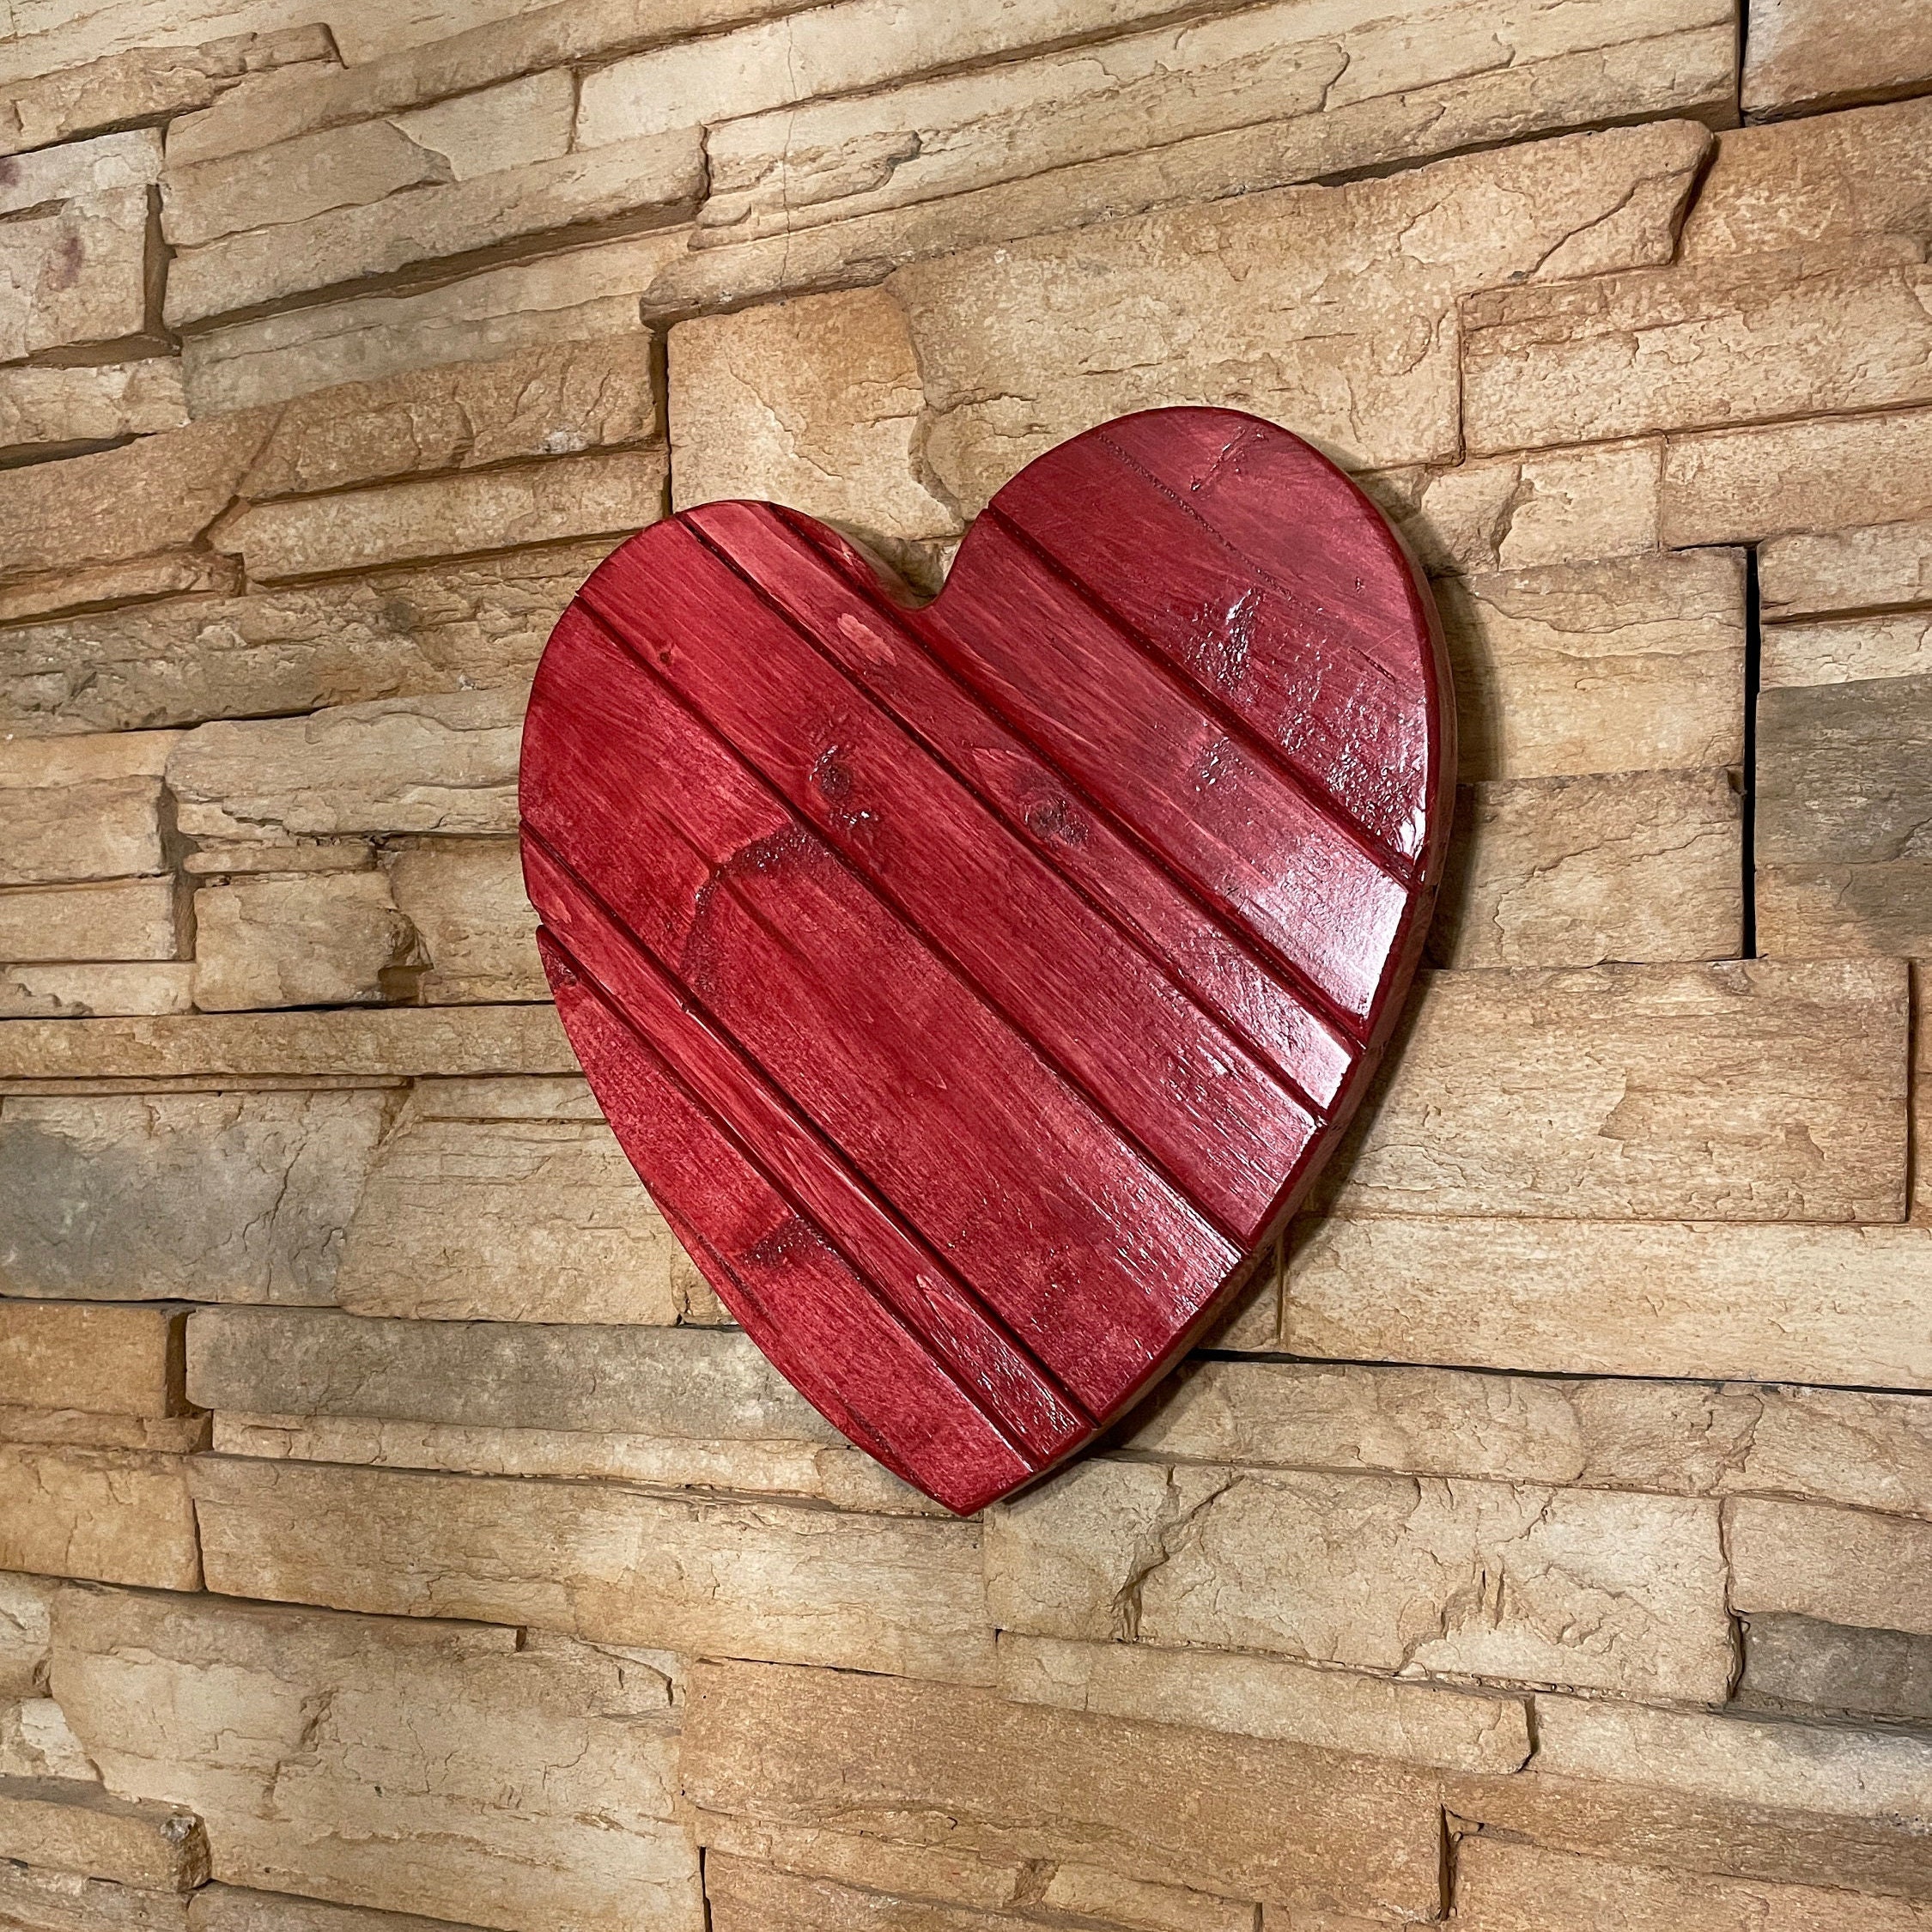 Rustic Hanging Heart Valentine Galentine Hearts Rustic Decor Heart  Decoration Present Tags Wooden Log Heart Decoration -  UK